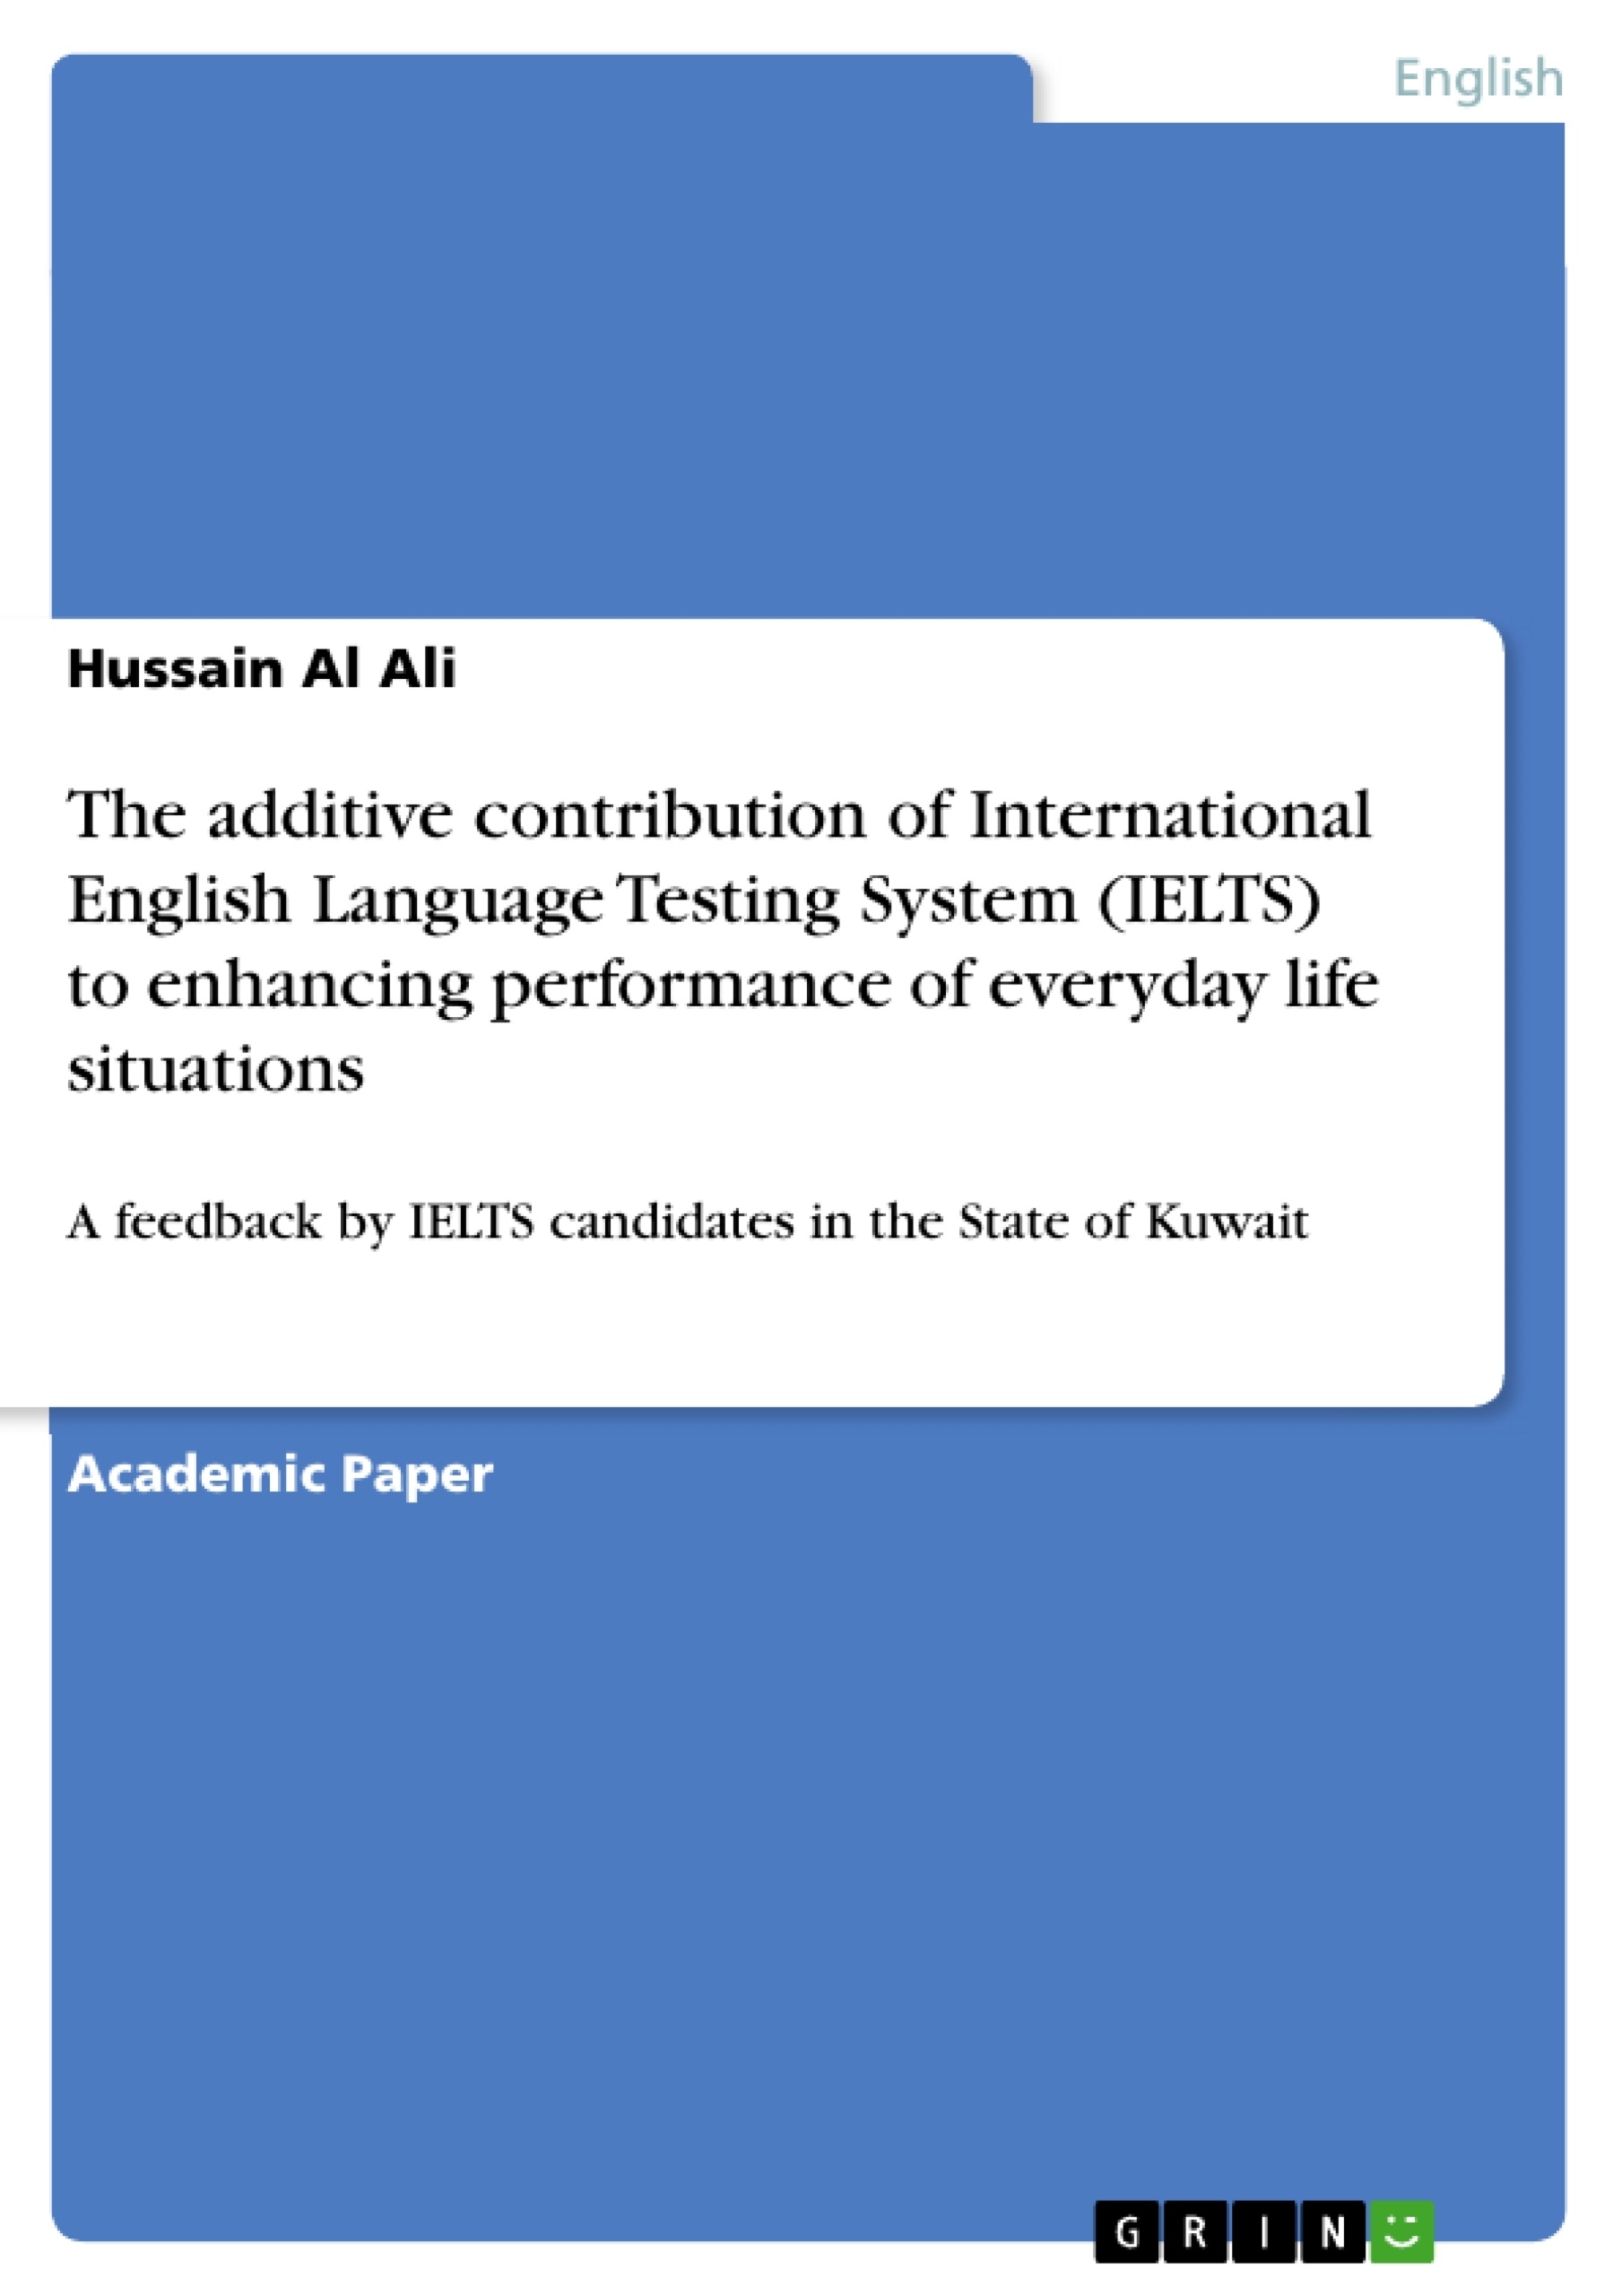 Título: The additive contribution of International English Language Testing System (IELTS) to enhancing performance of everyday life situations